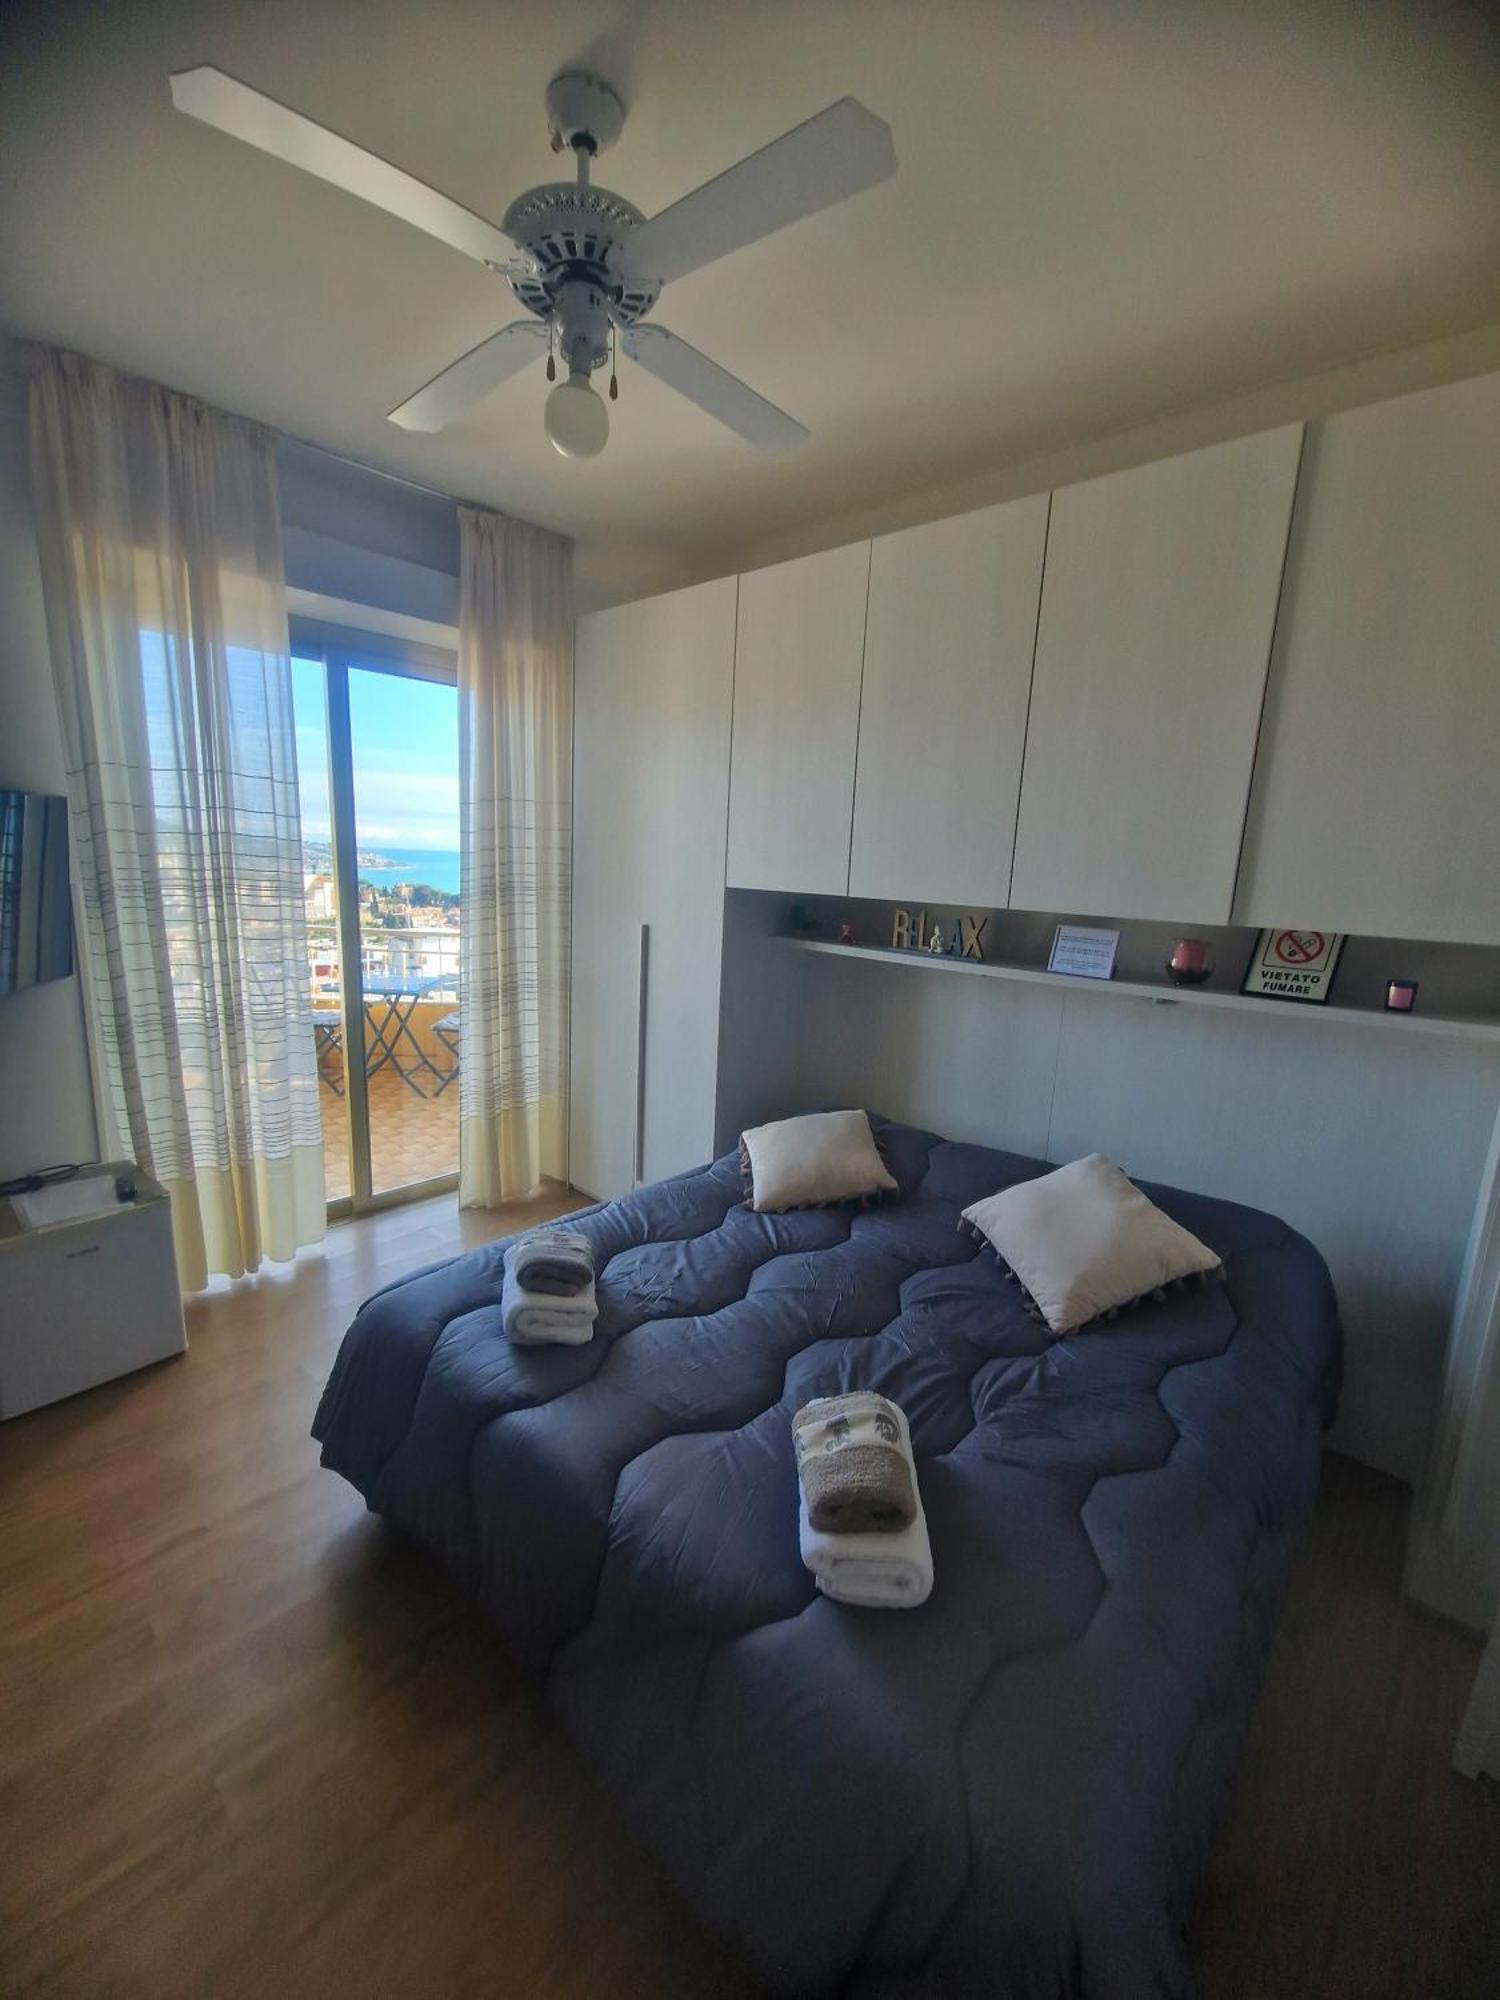 Il Paradiso Del Relax Chambres D'Hotes Affittacamere Room With Sea View 圣雷默 外观 照片